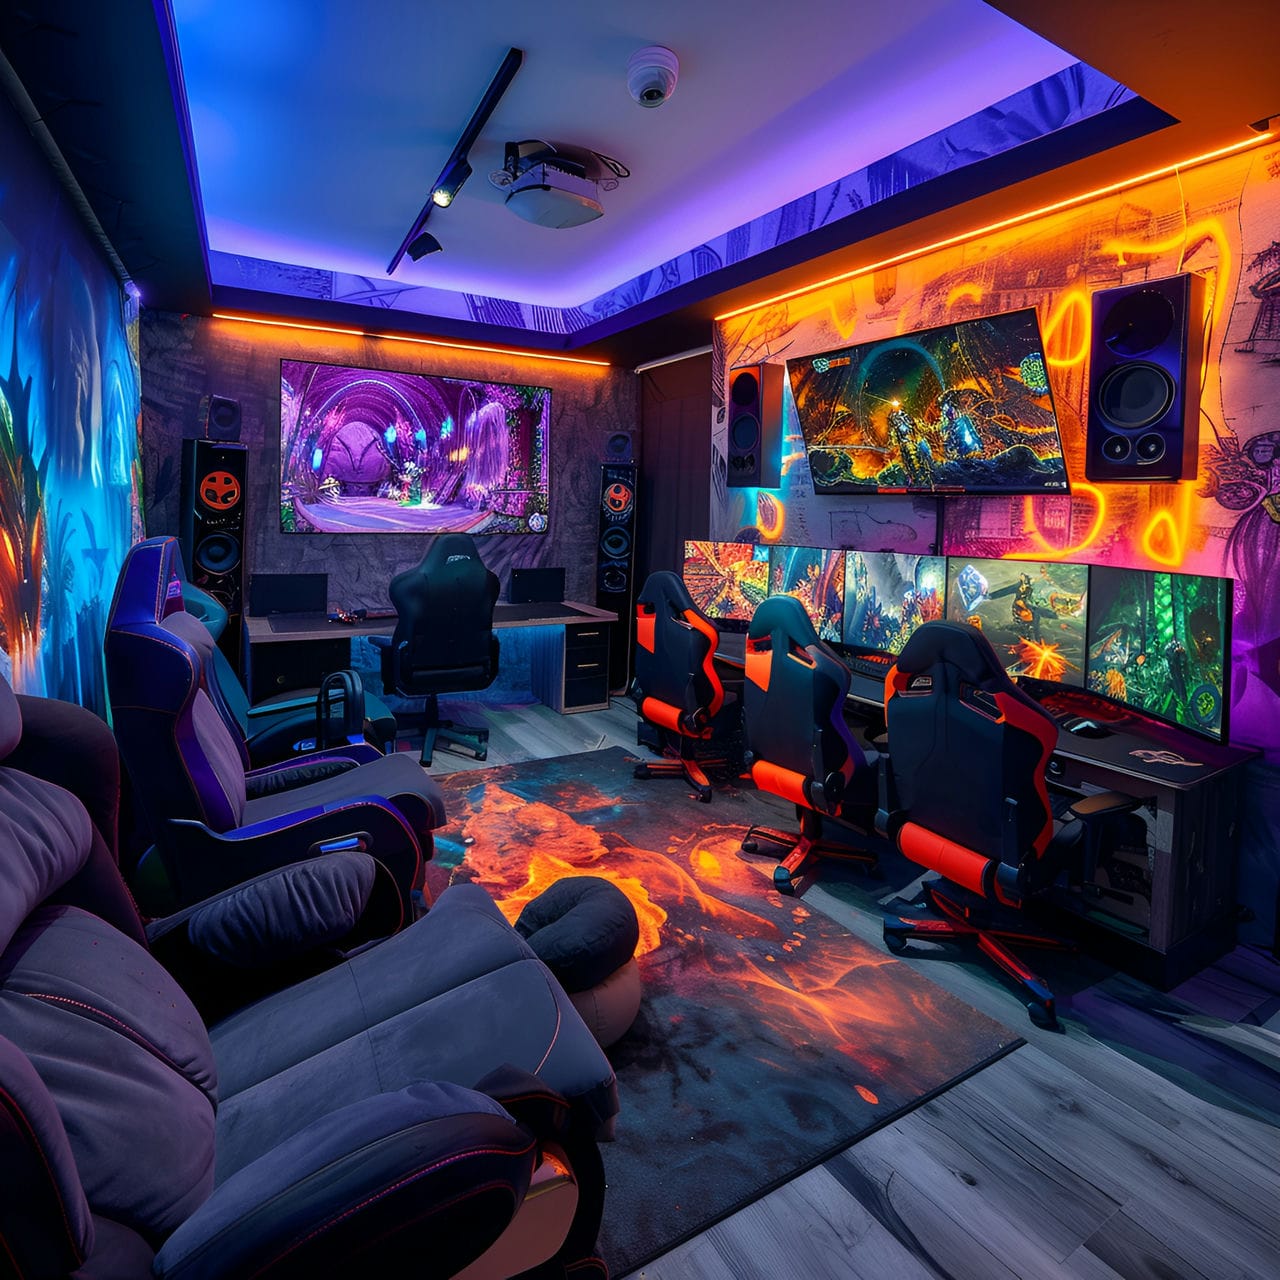 Man cave: size, functionality, uses, furniture, and renovation